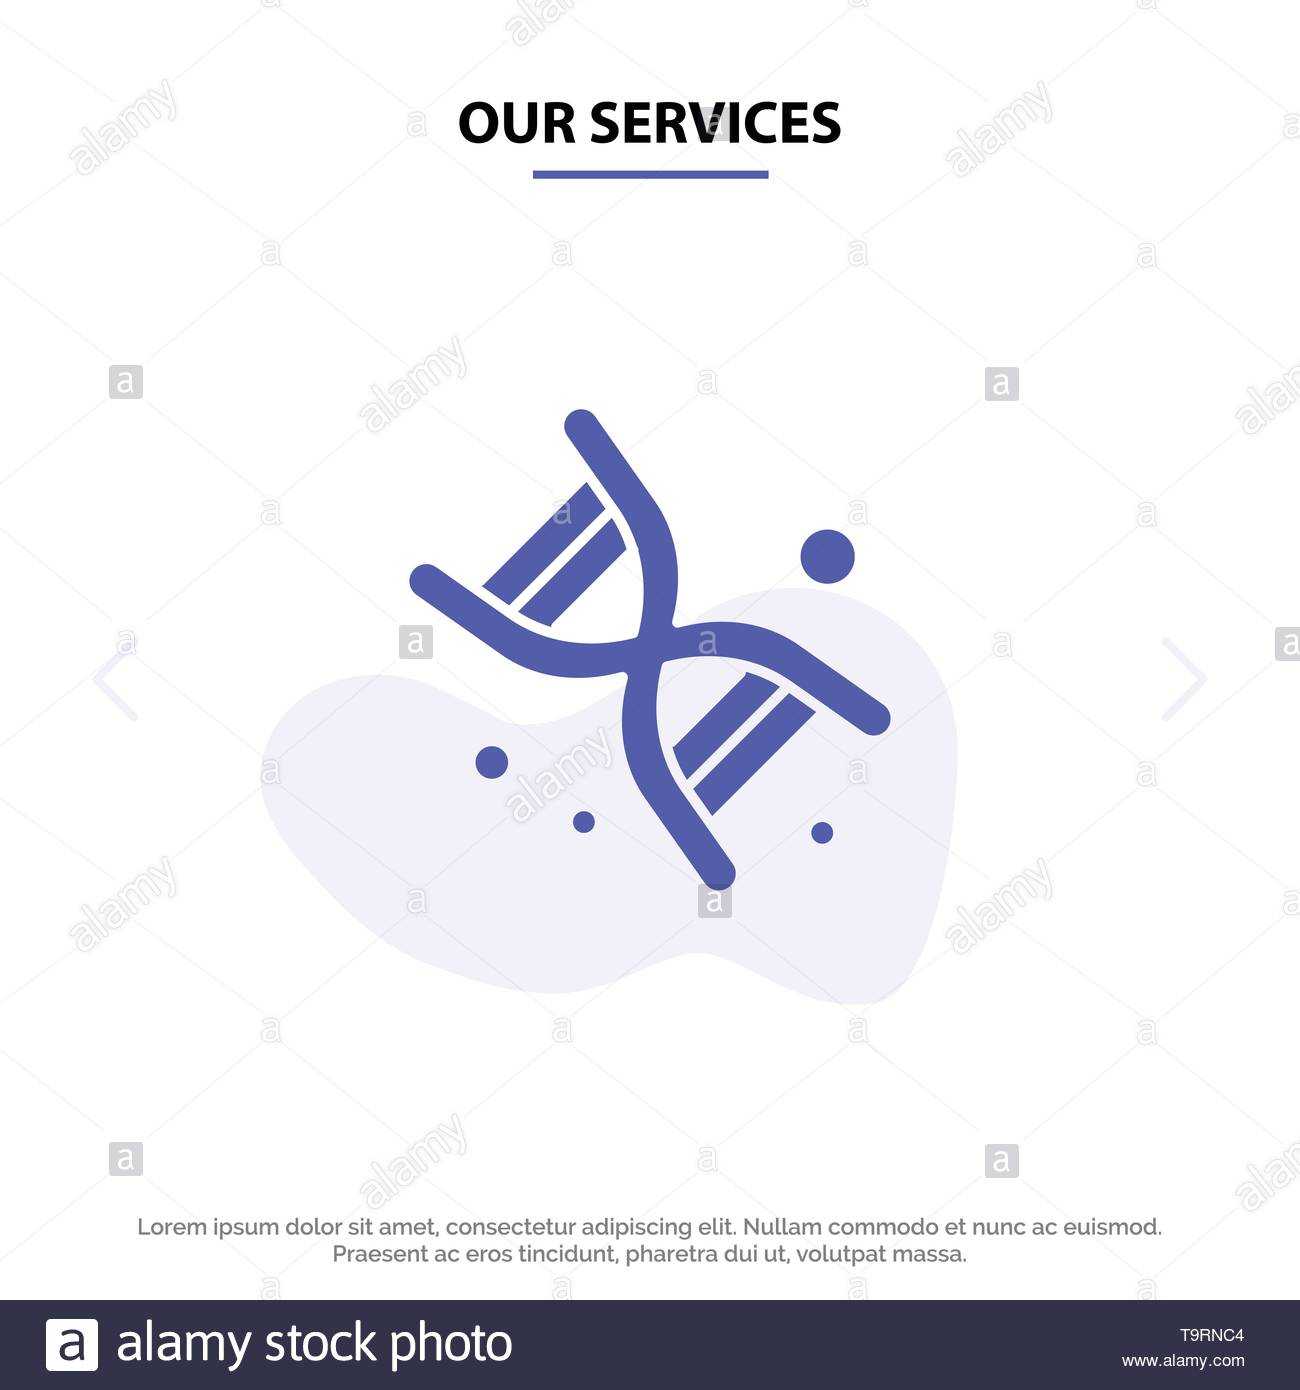 Our Services Bio, Dna, Genetics, Technology Solid Glyph Icon With Bio Card Template